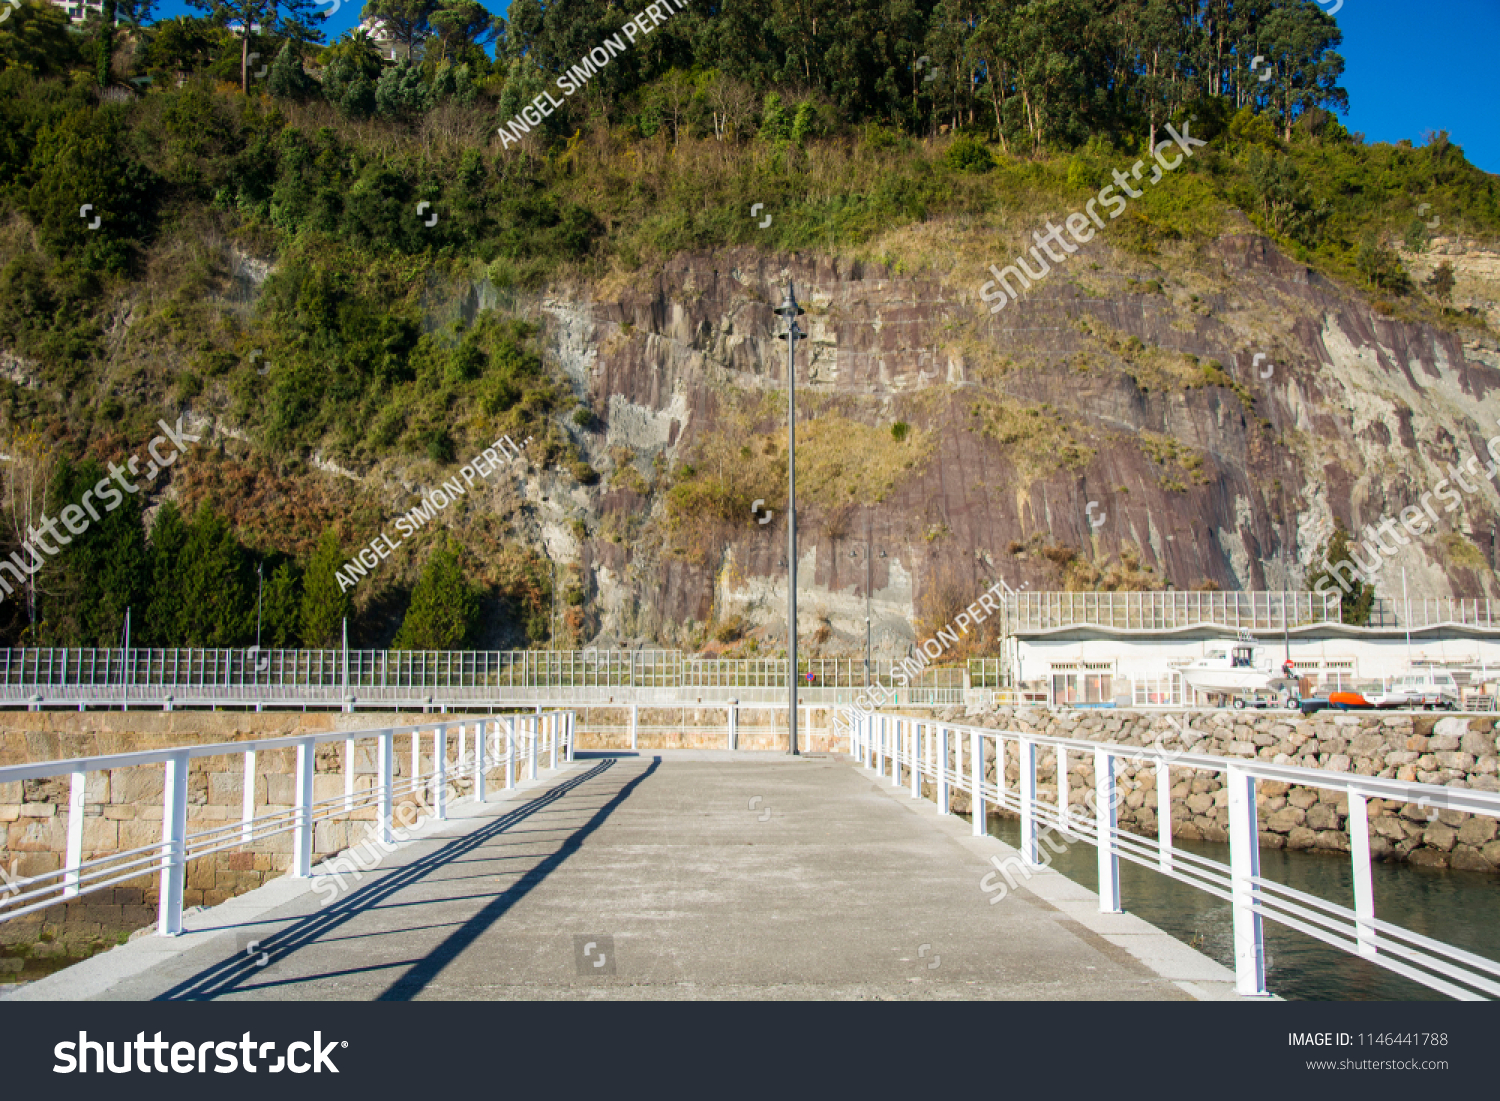 Photo of a cliff with vegetation, white railing and sunlight #1146441788